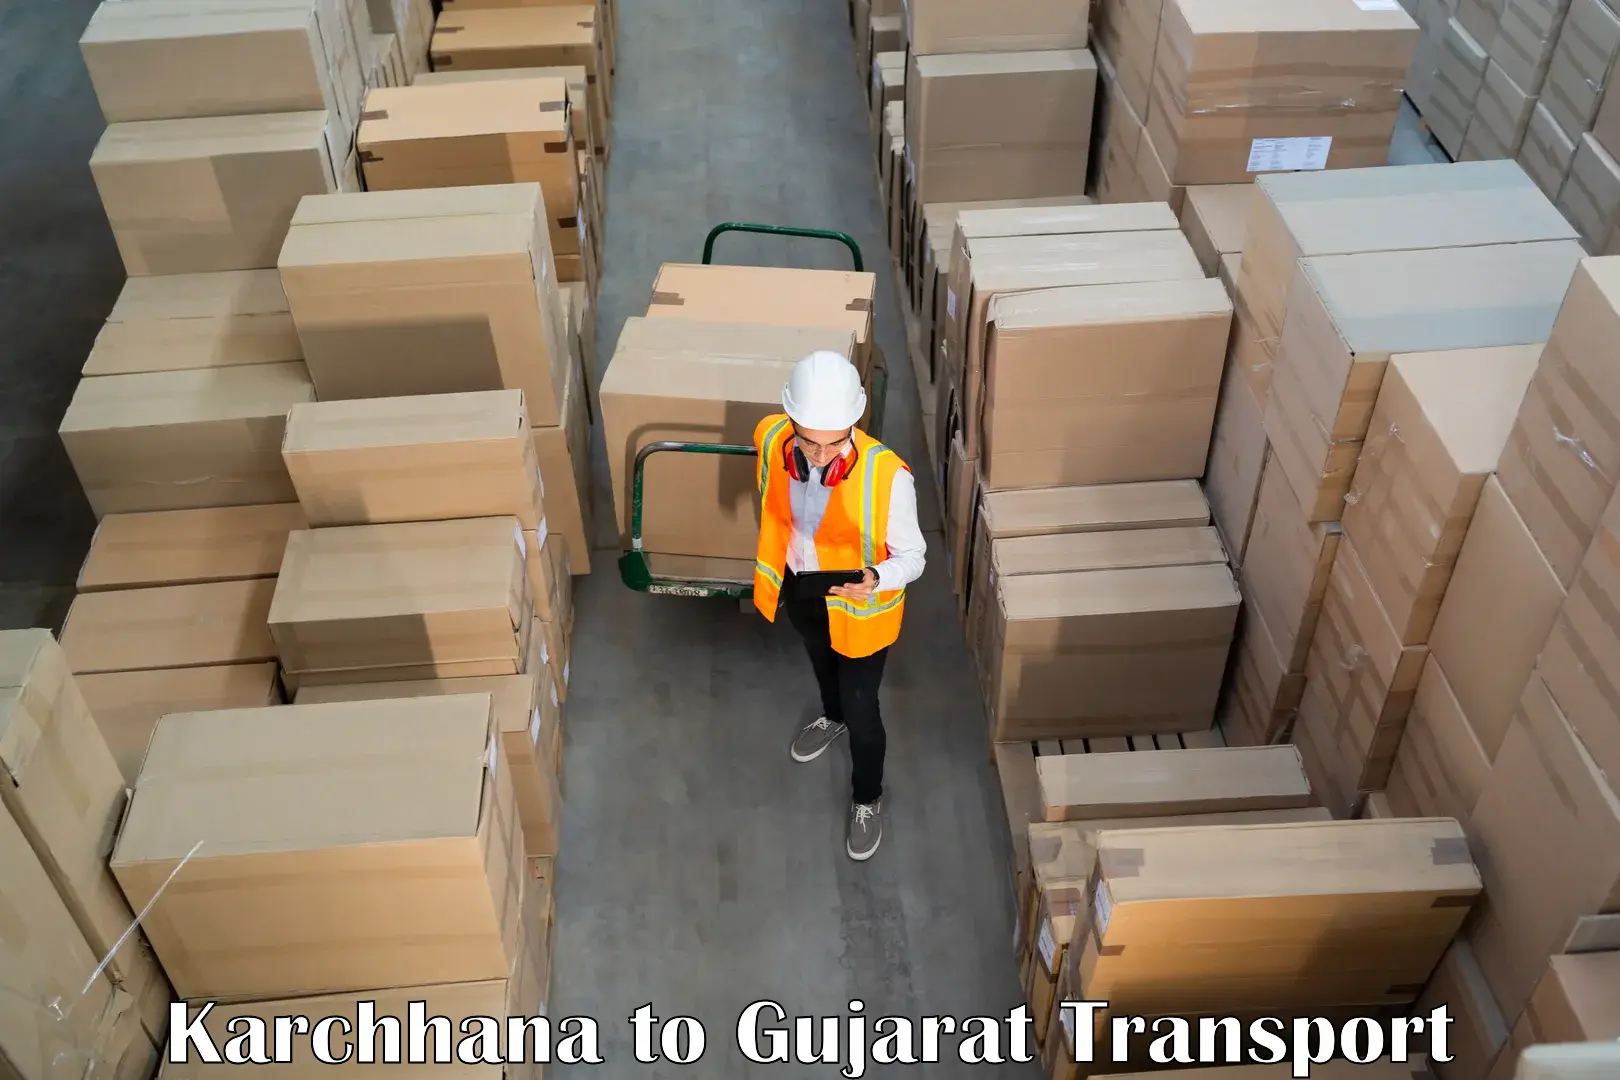 Air freight transport services Karchhana to Bhuj